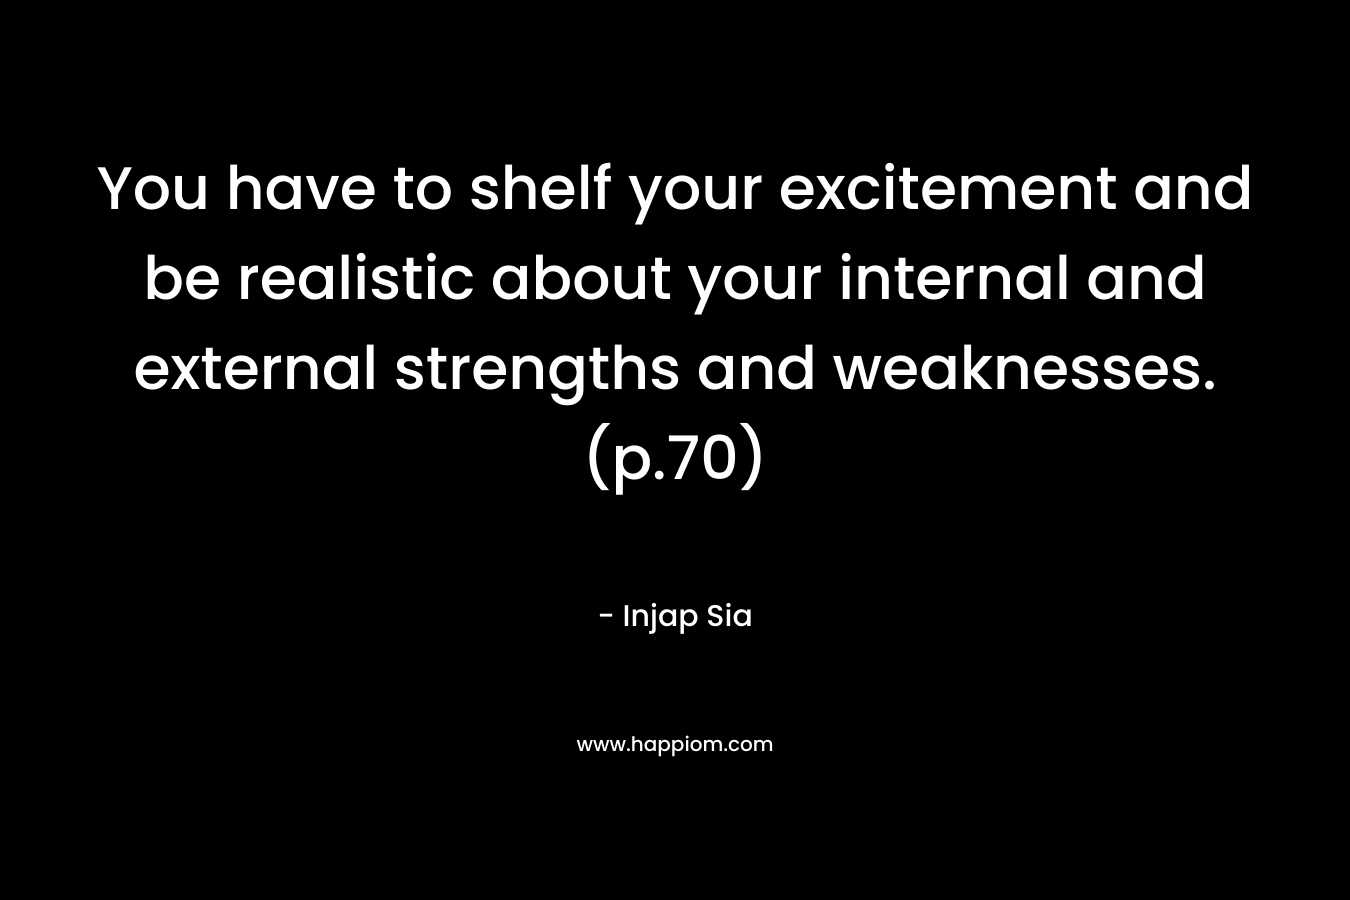 You have to shelf your excitement and be realistic about your internal and external strengths and weaknesses. (p.70) – Injap Sia